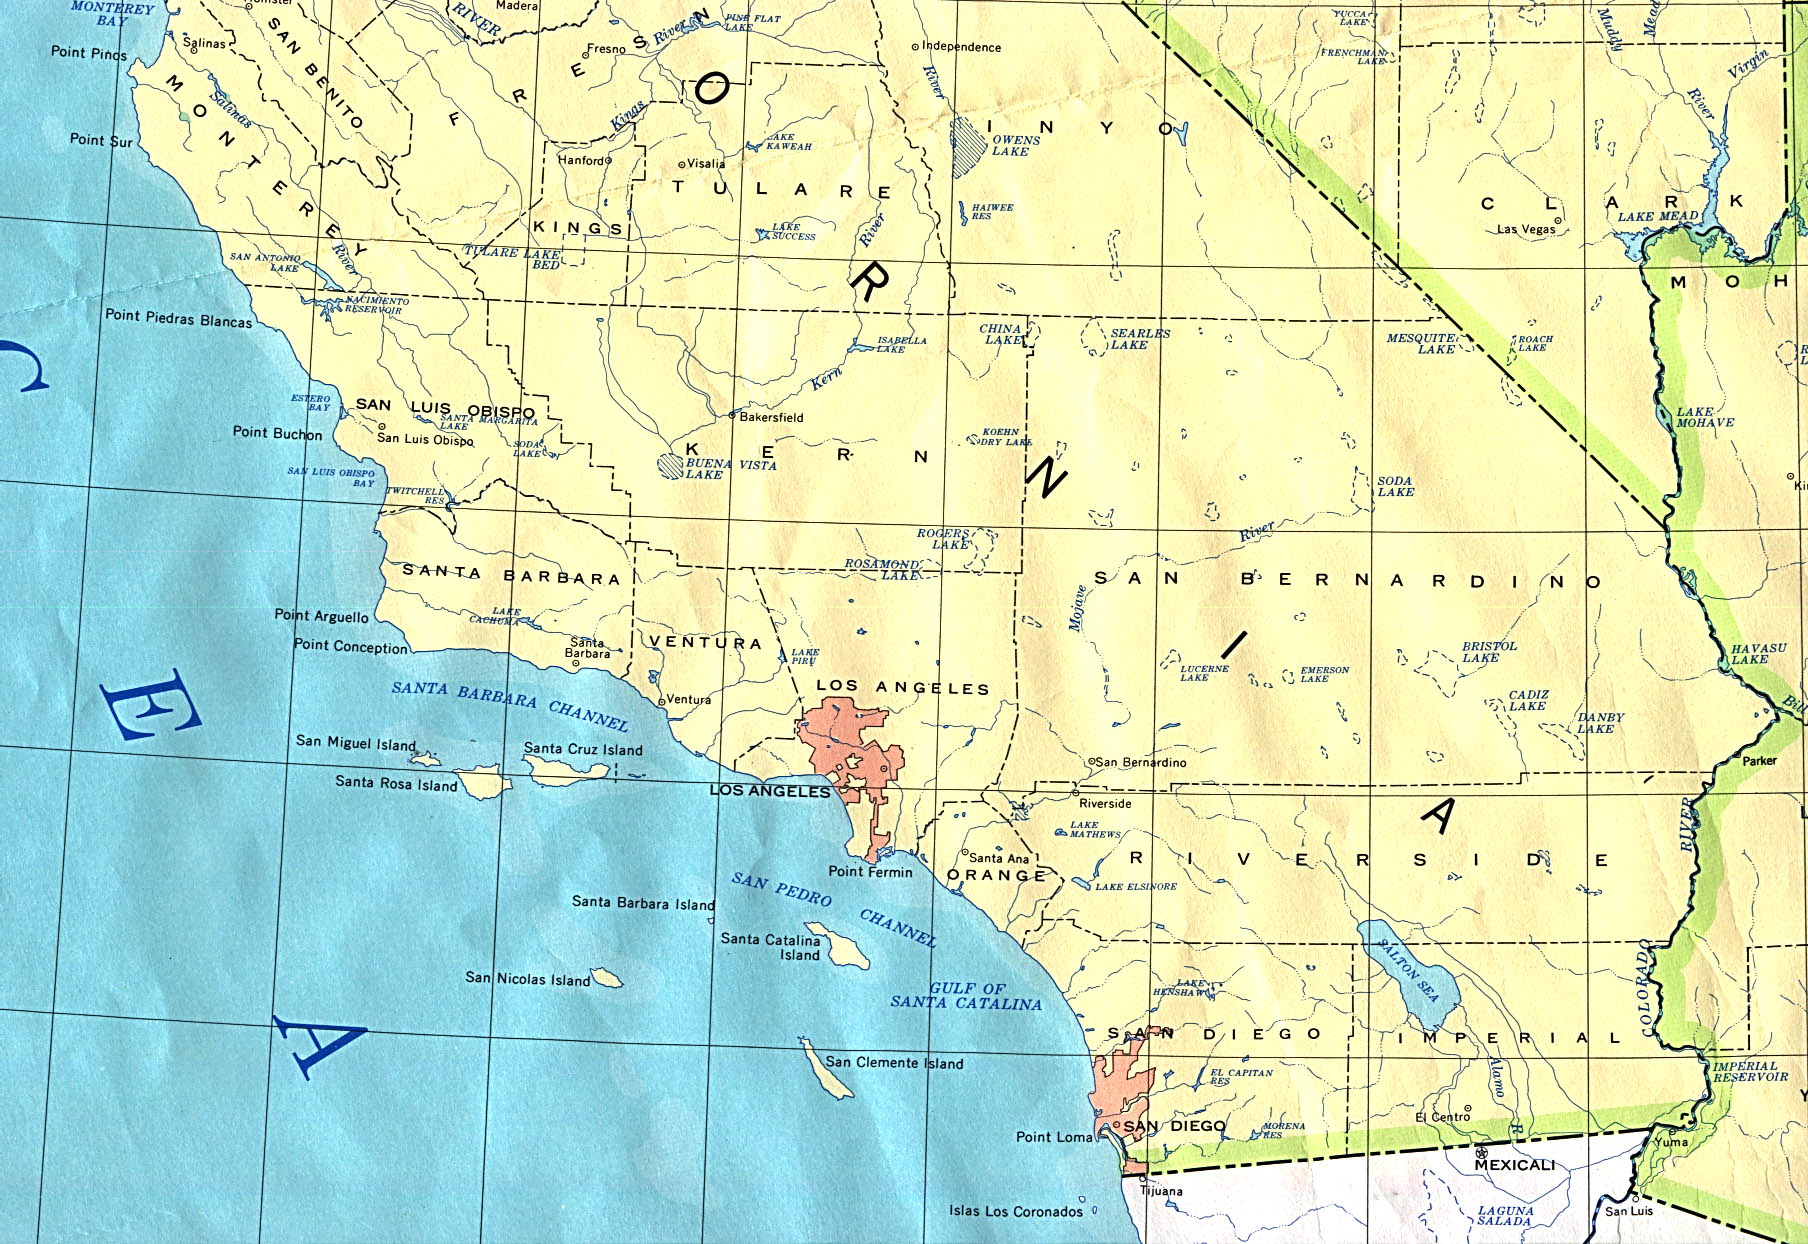 California Map - Online Maps Of California State - Online Map Of California